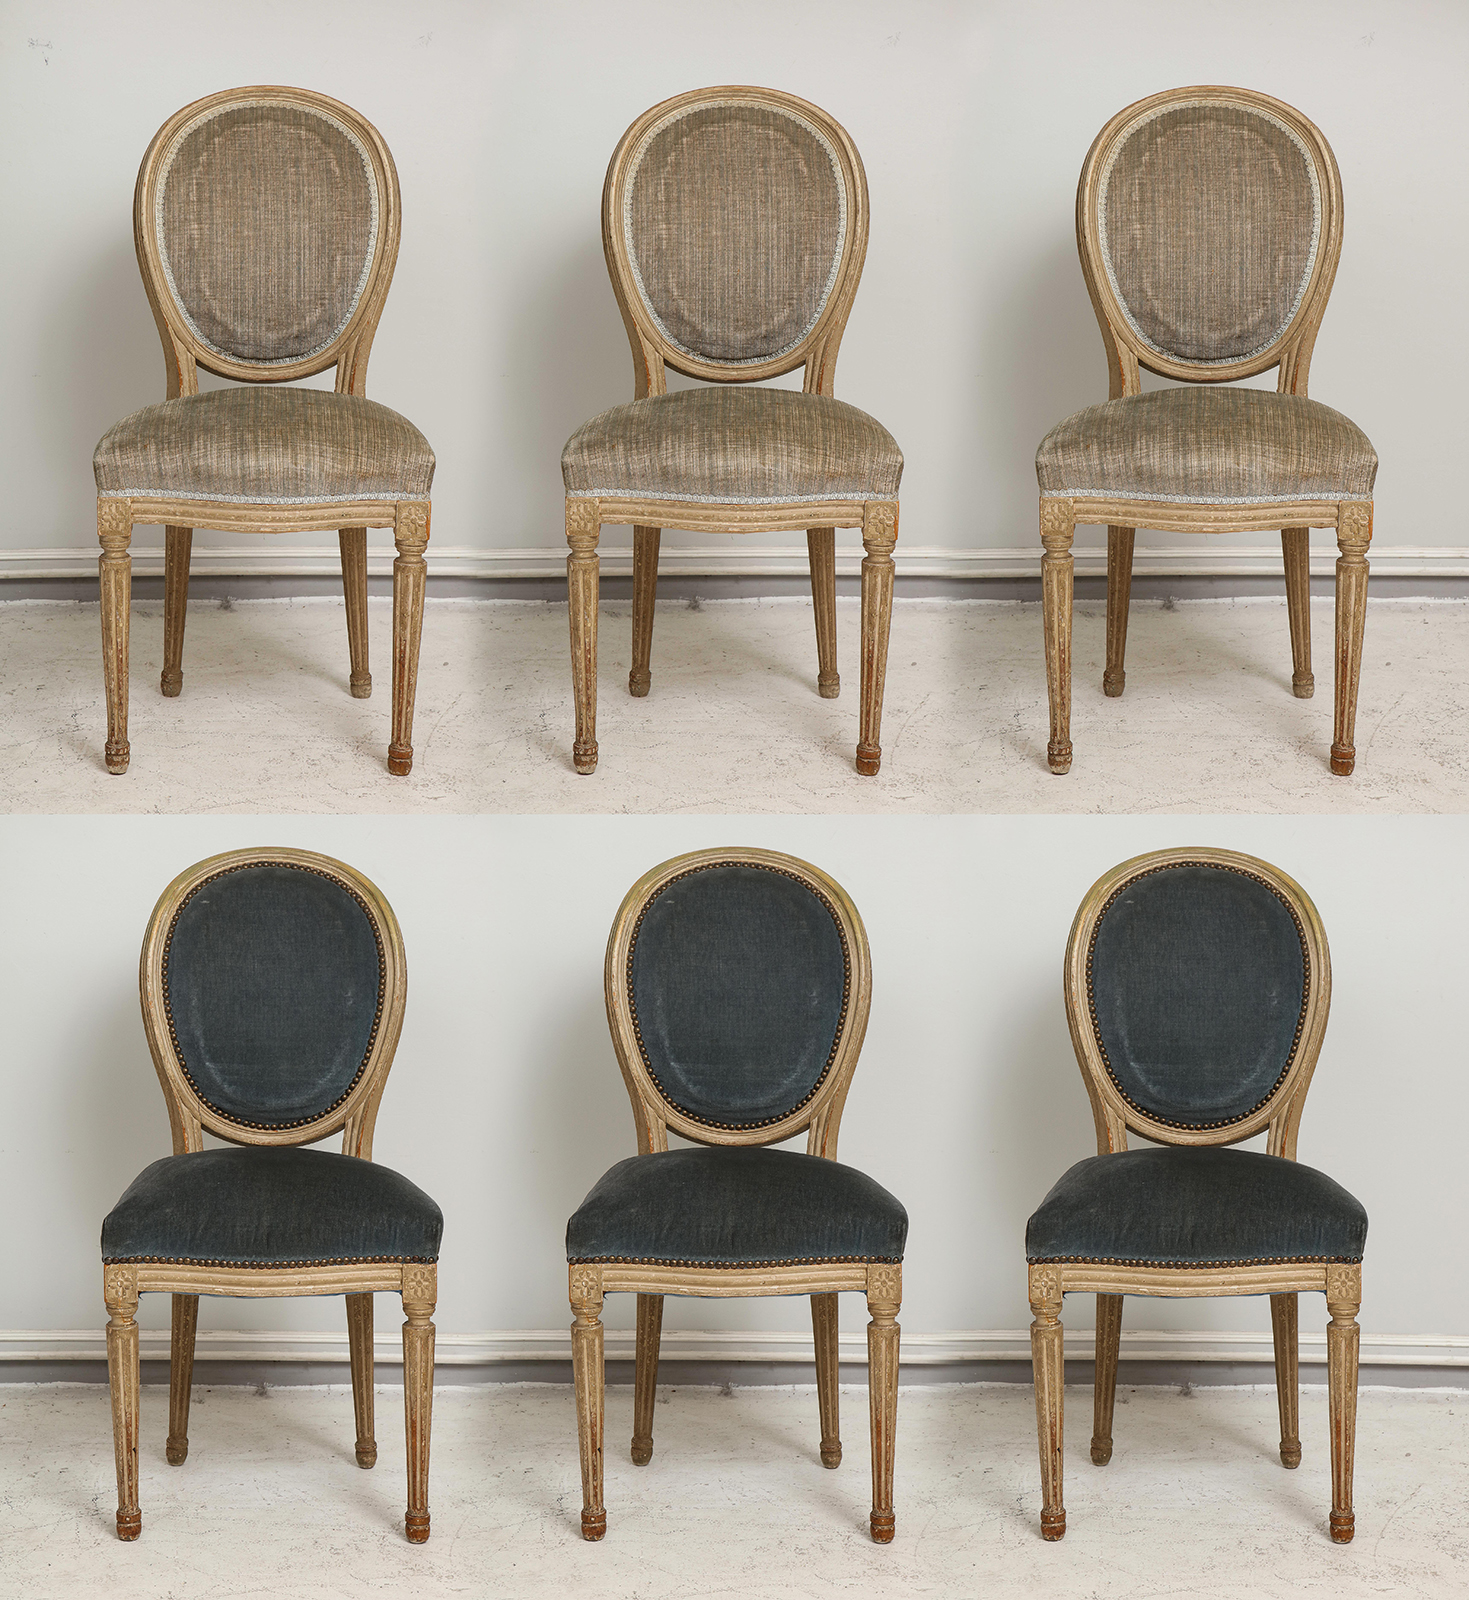 Set of Six Vintage Louis XVI, Style Painted Dining Room Chairs